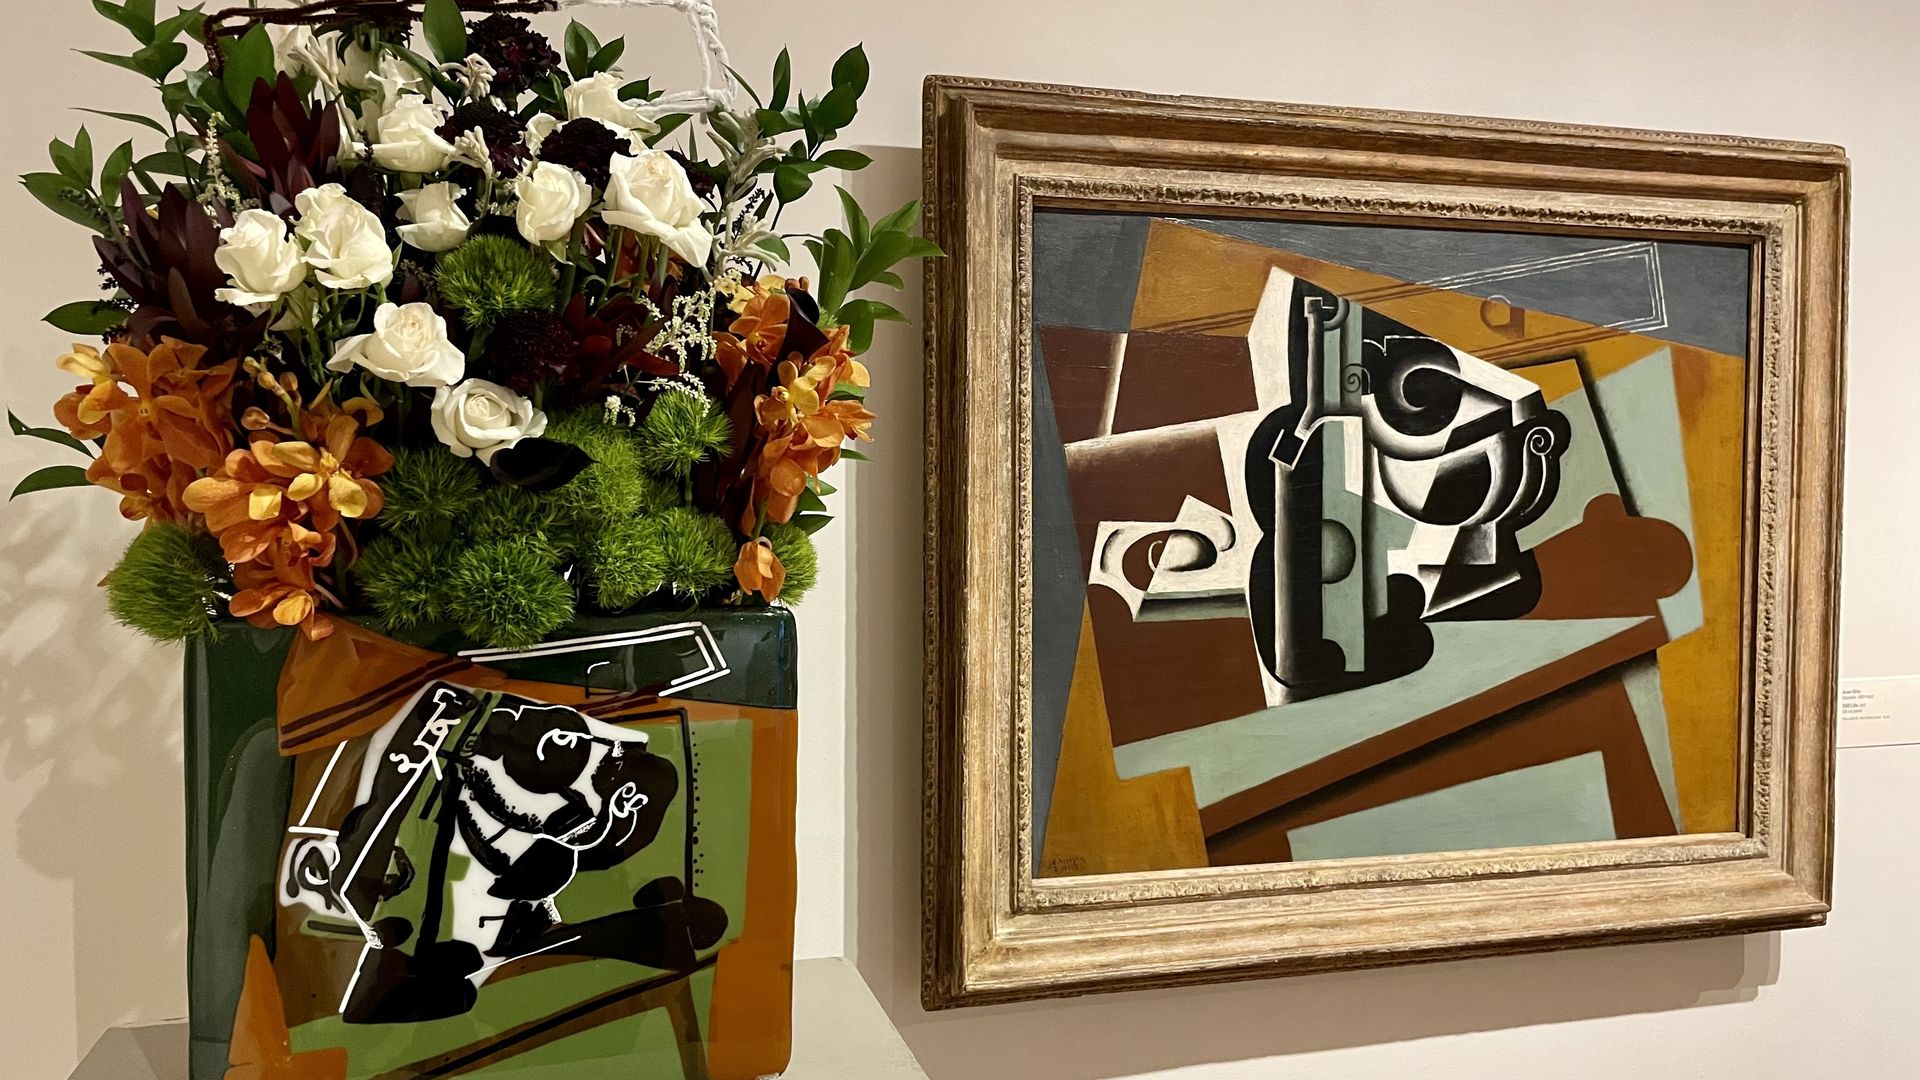 A floral arrangement next to a painting of squares.